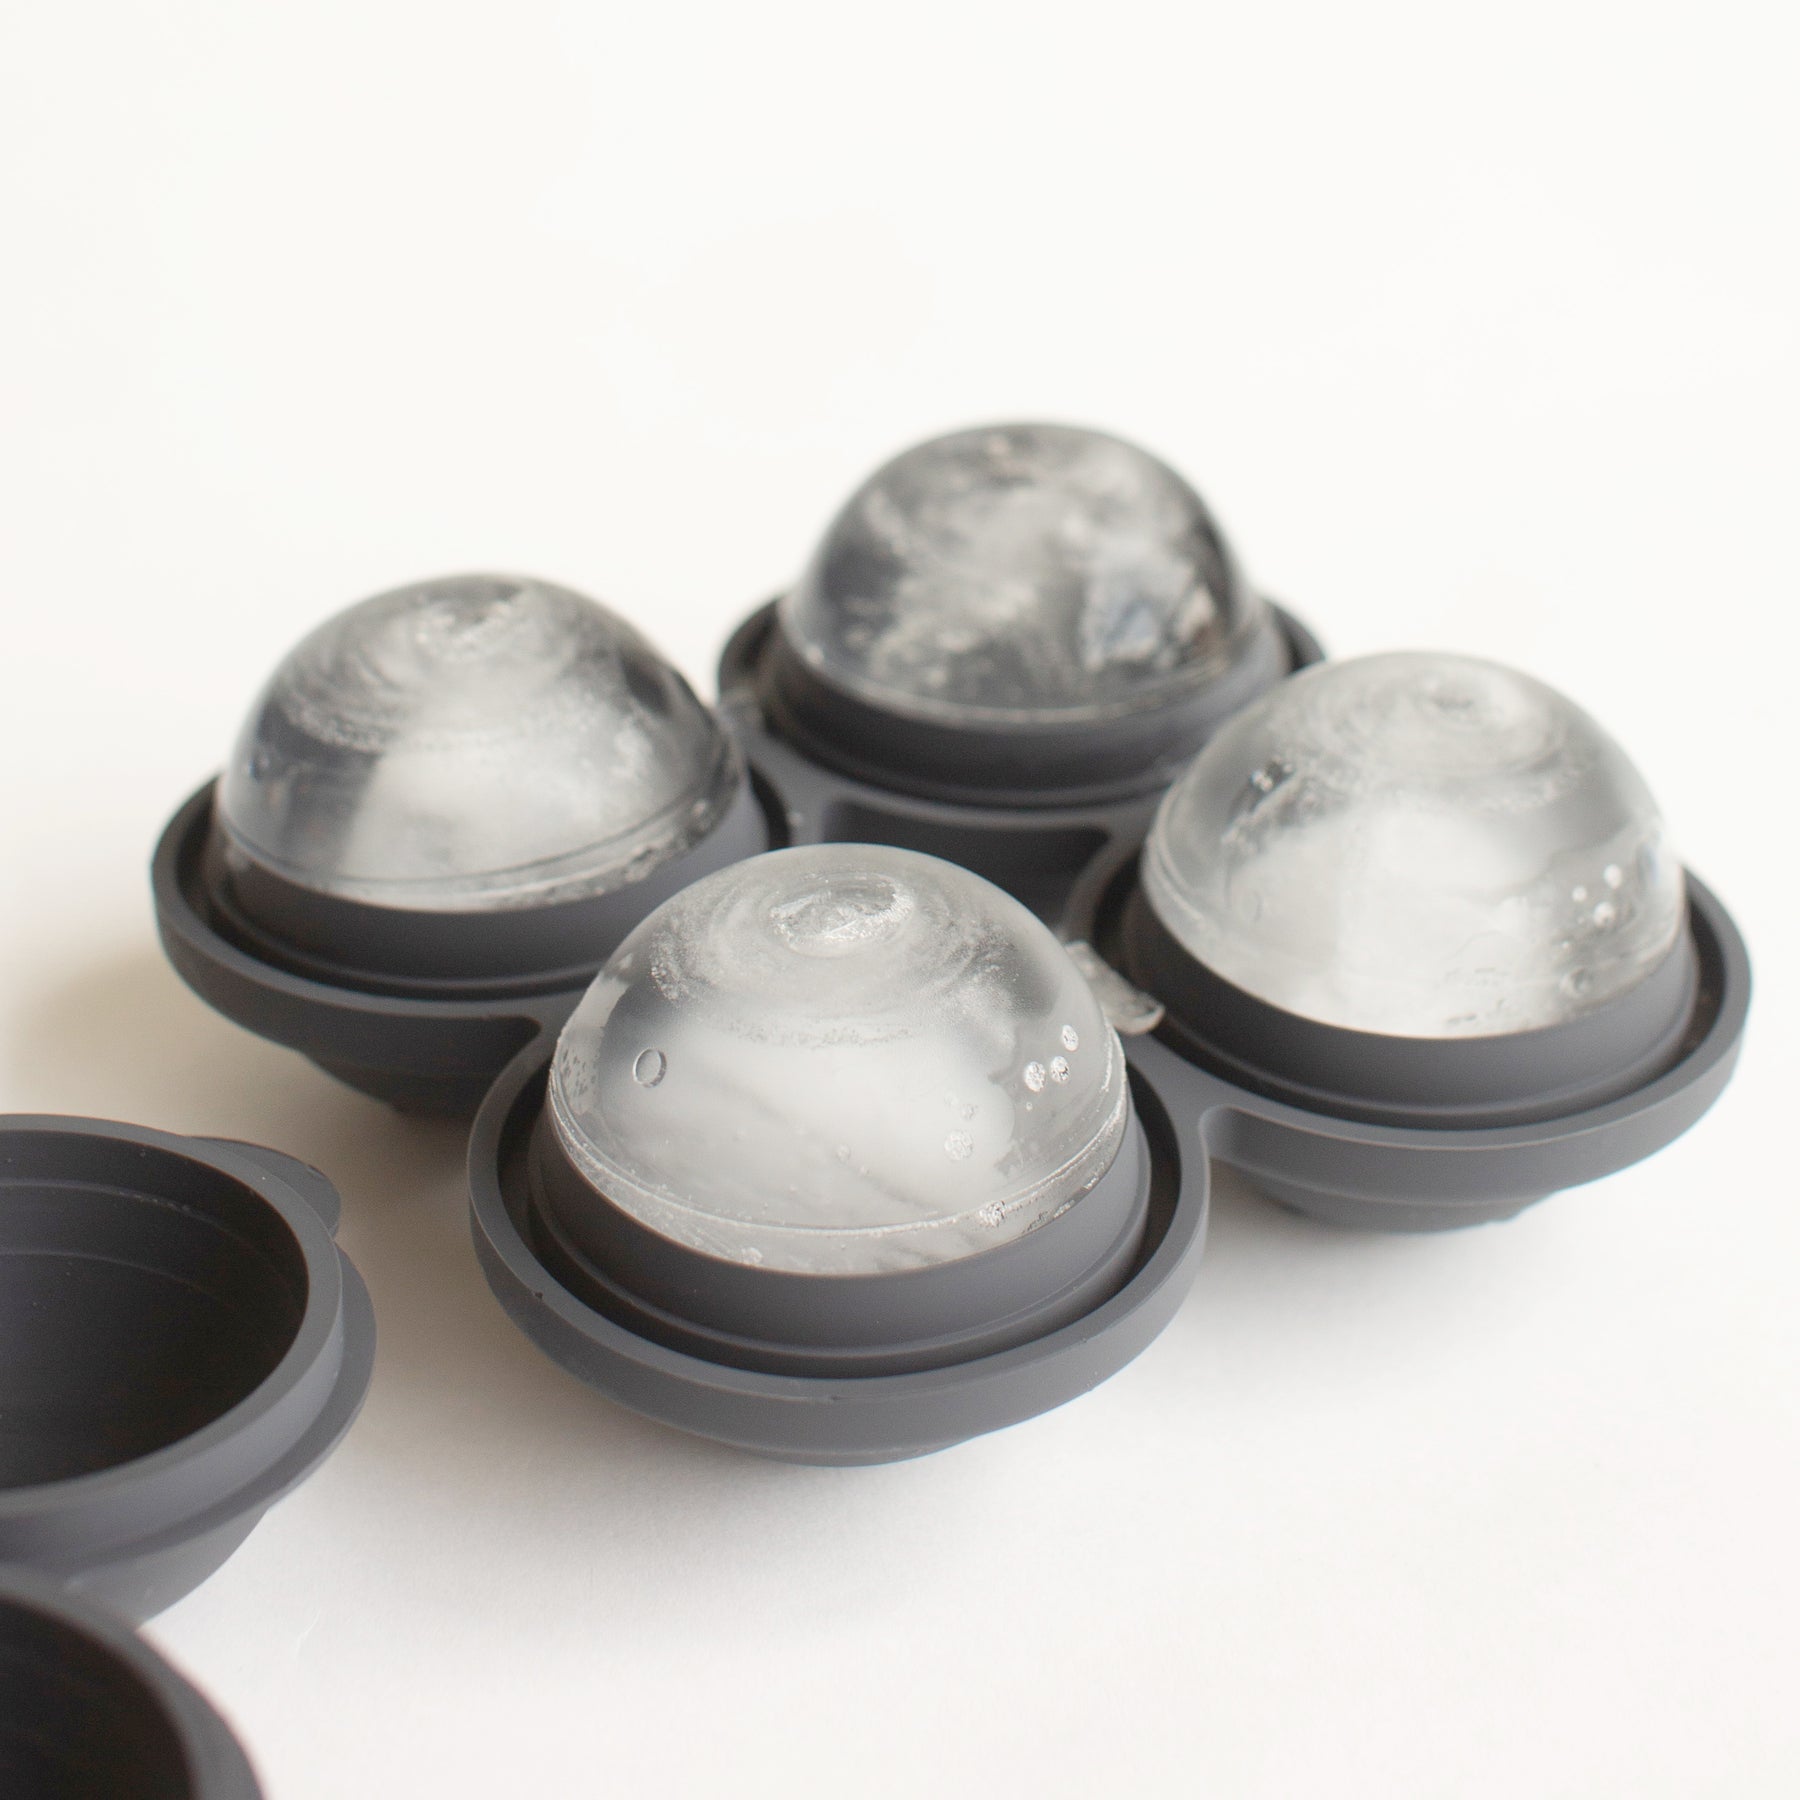 Cocktail Ice Tray Sphere